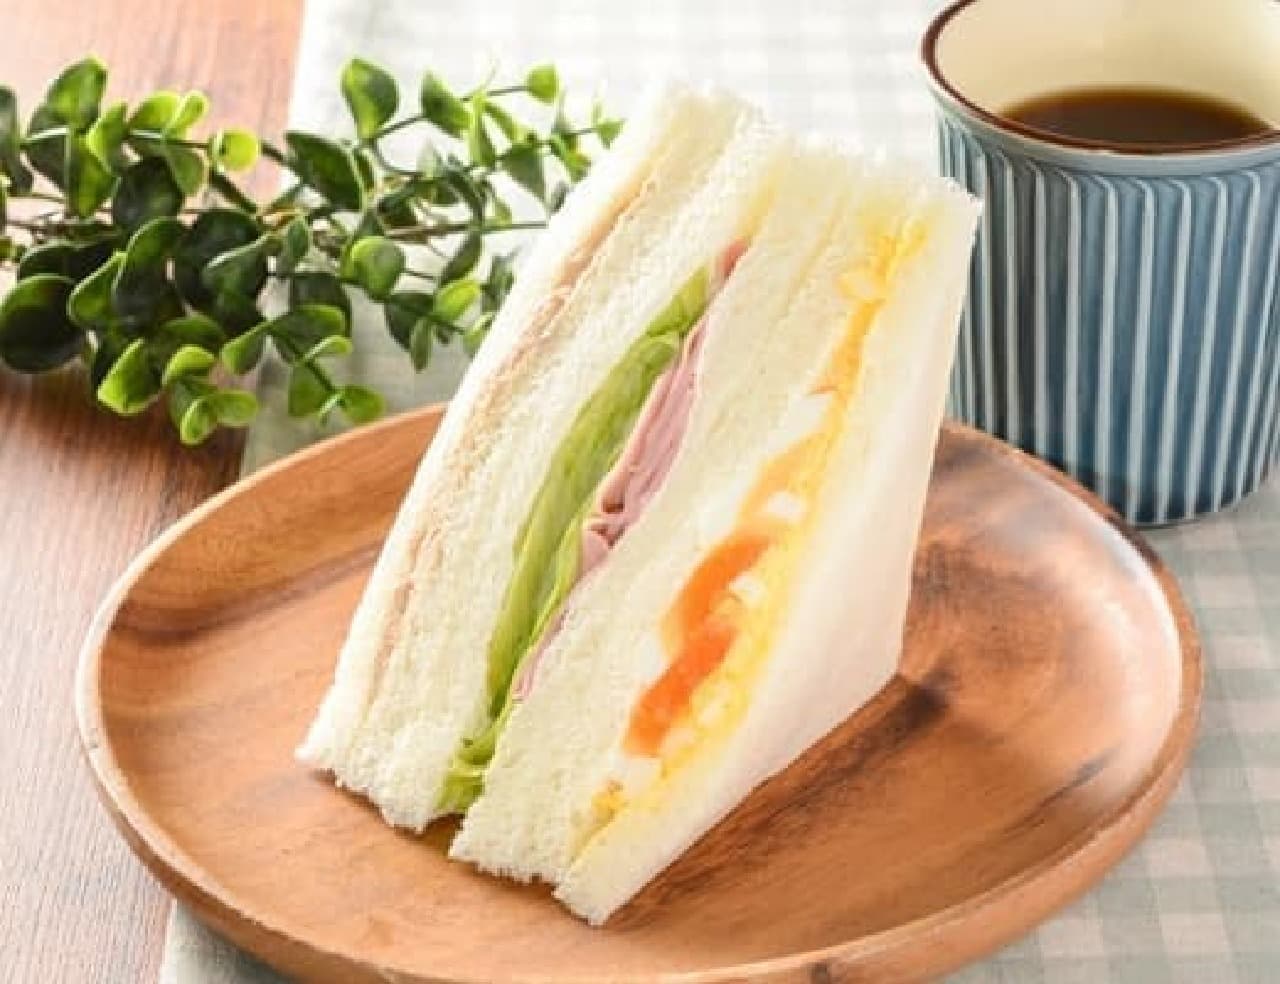 Lawson "Mixed Sandwich (increased volume)